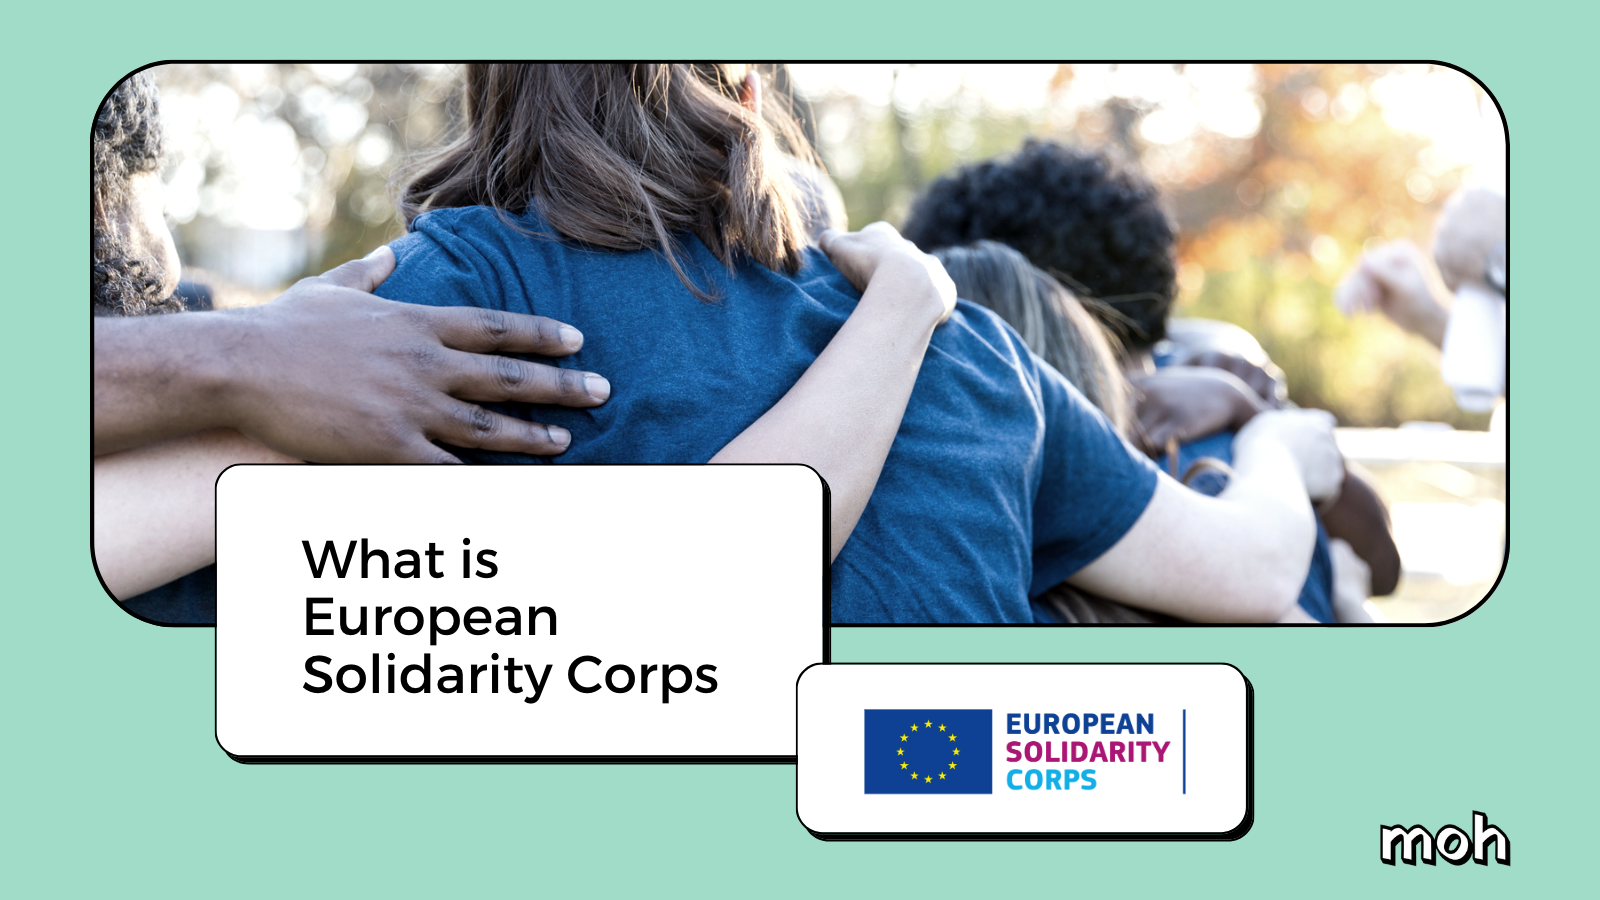 What is European Soldiarity Corps - MOH